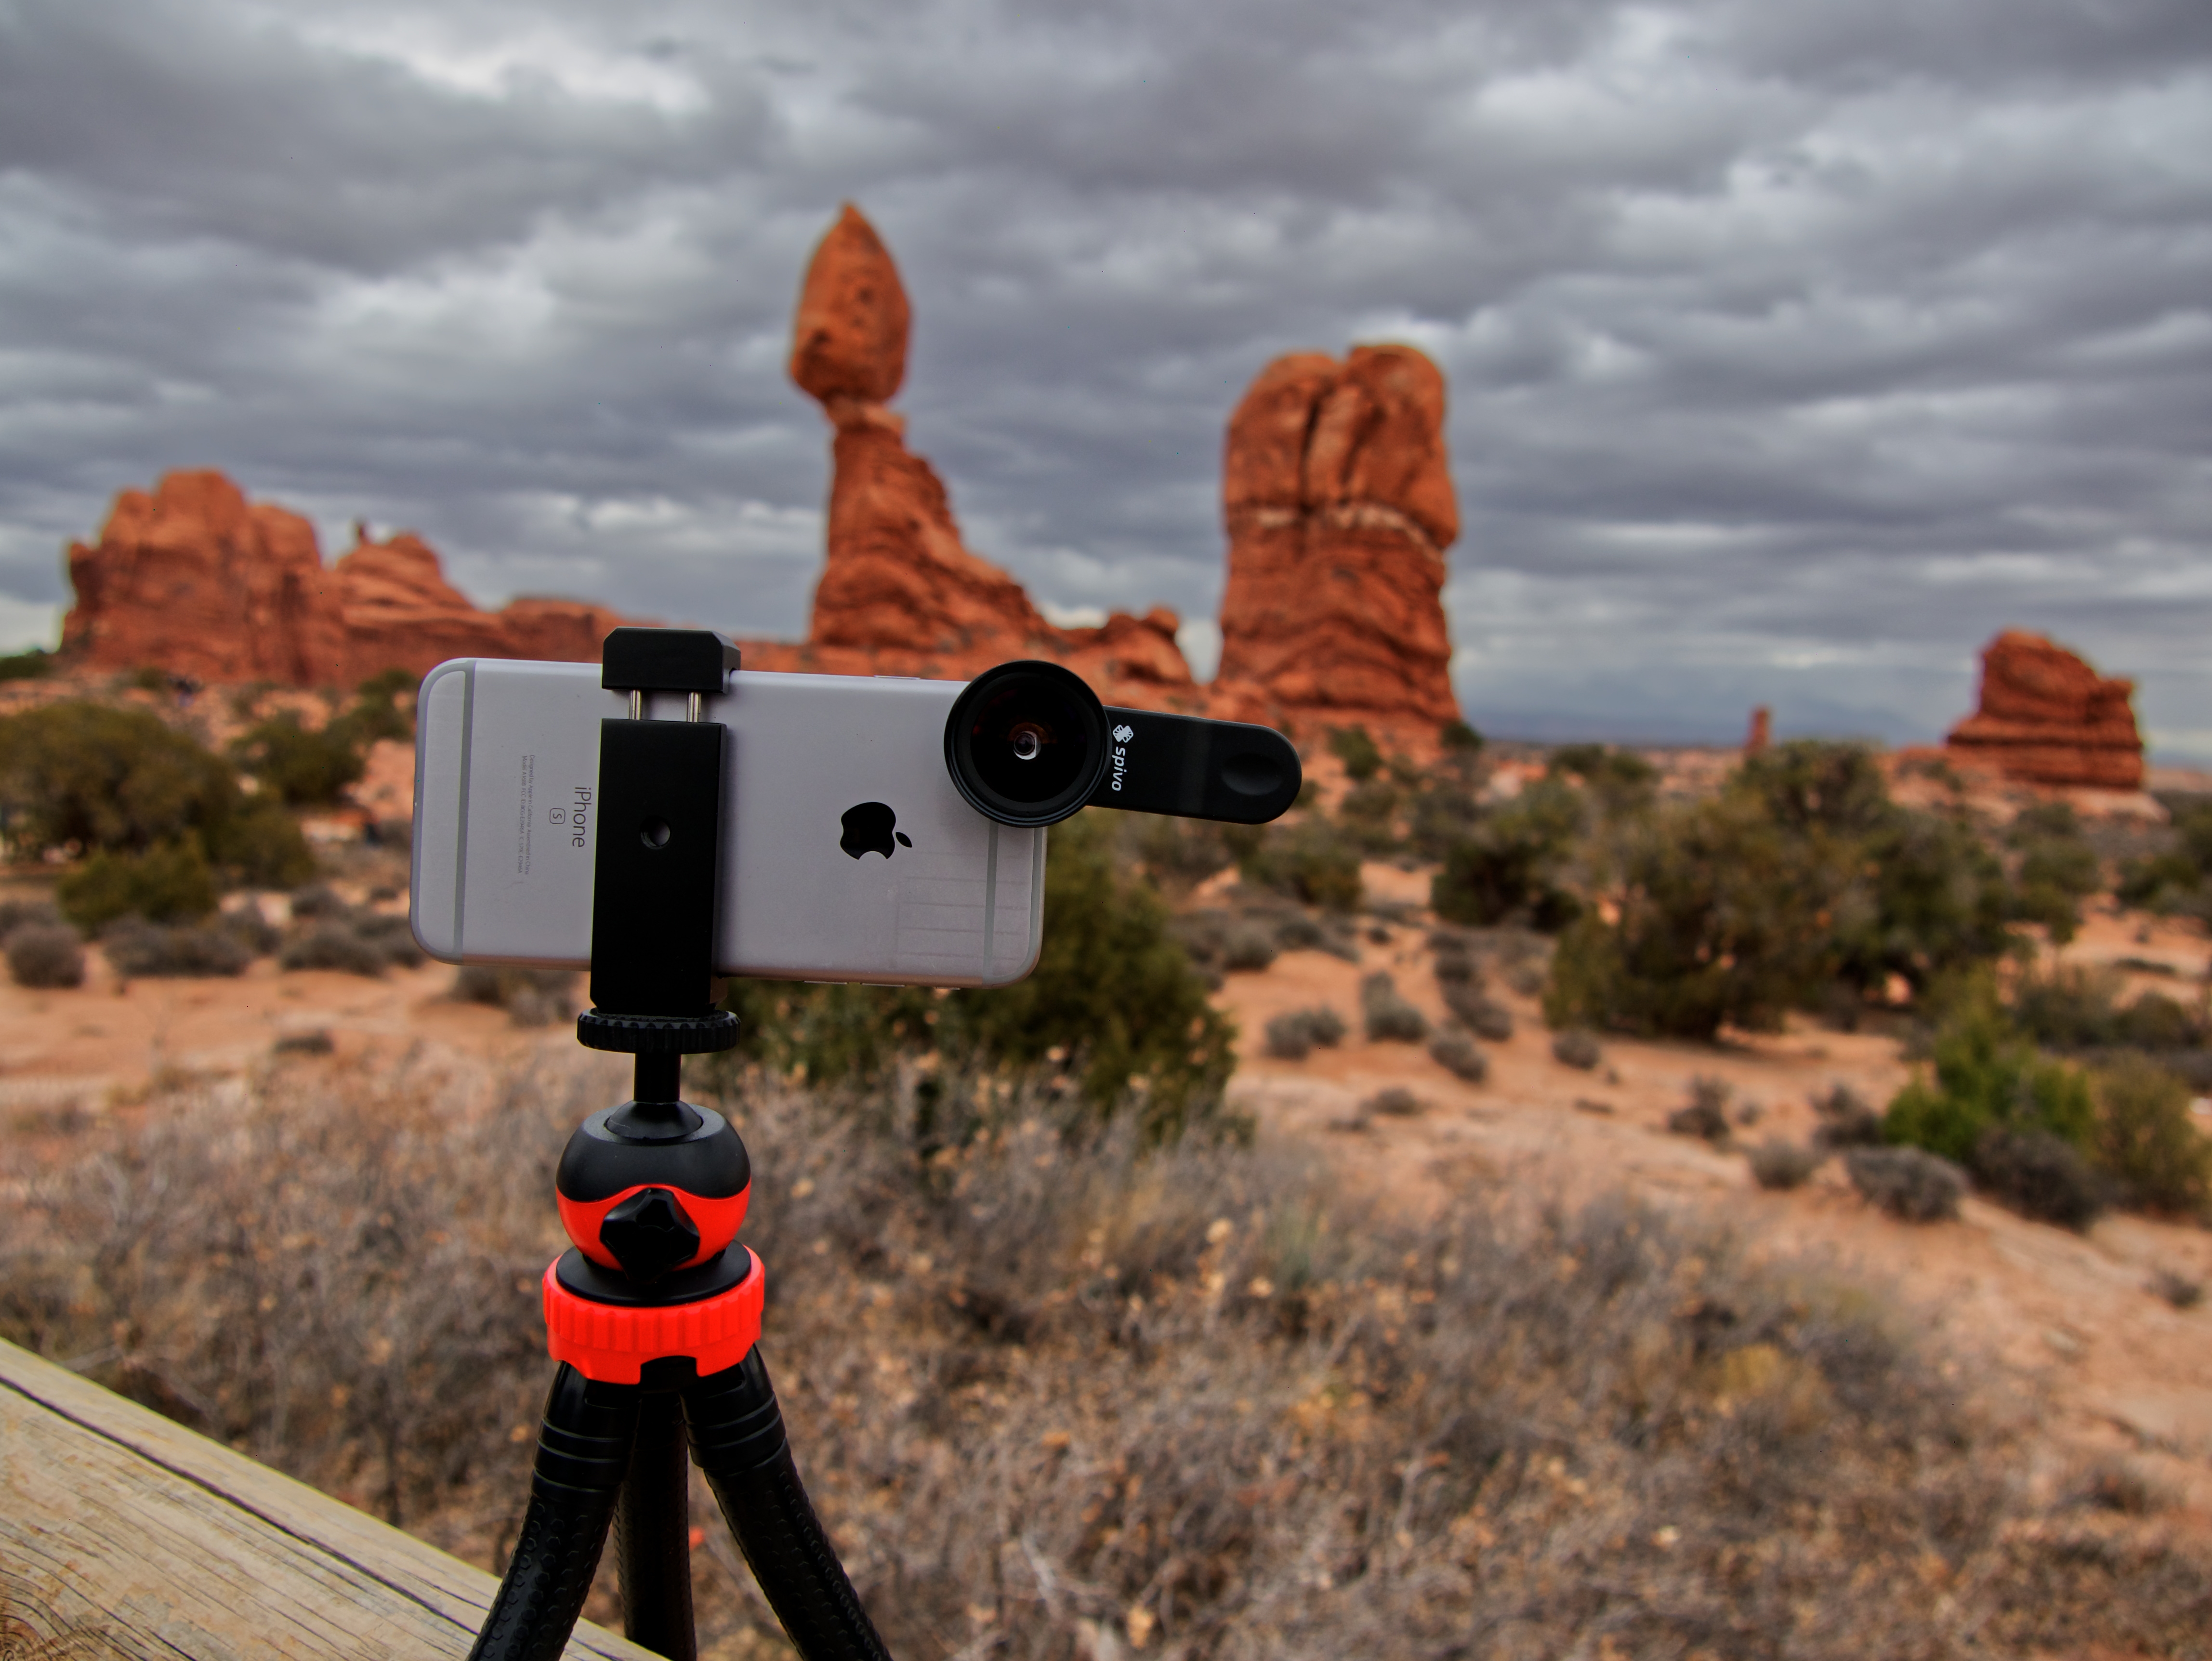 Spivo flexible tripod holding a phone at Balanced Rock in Arches